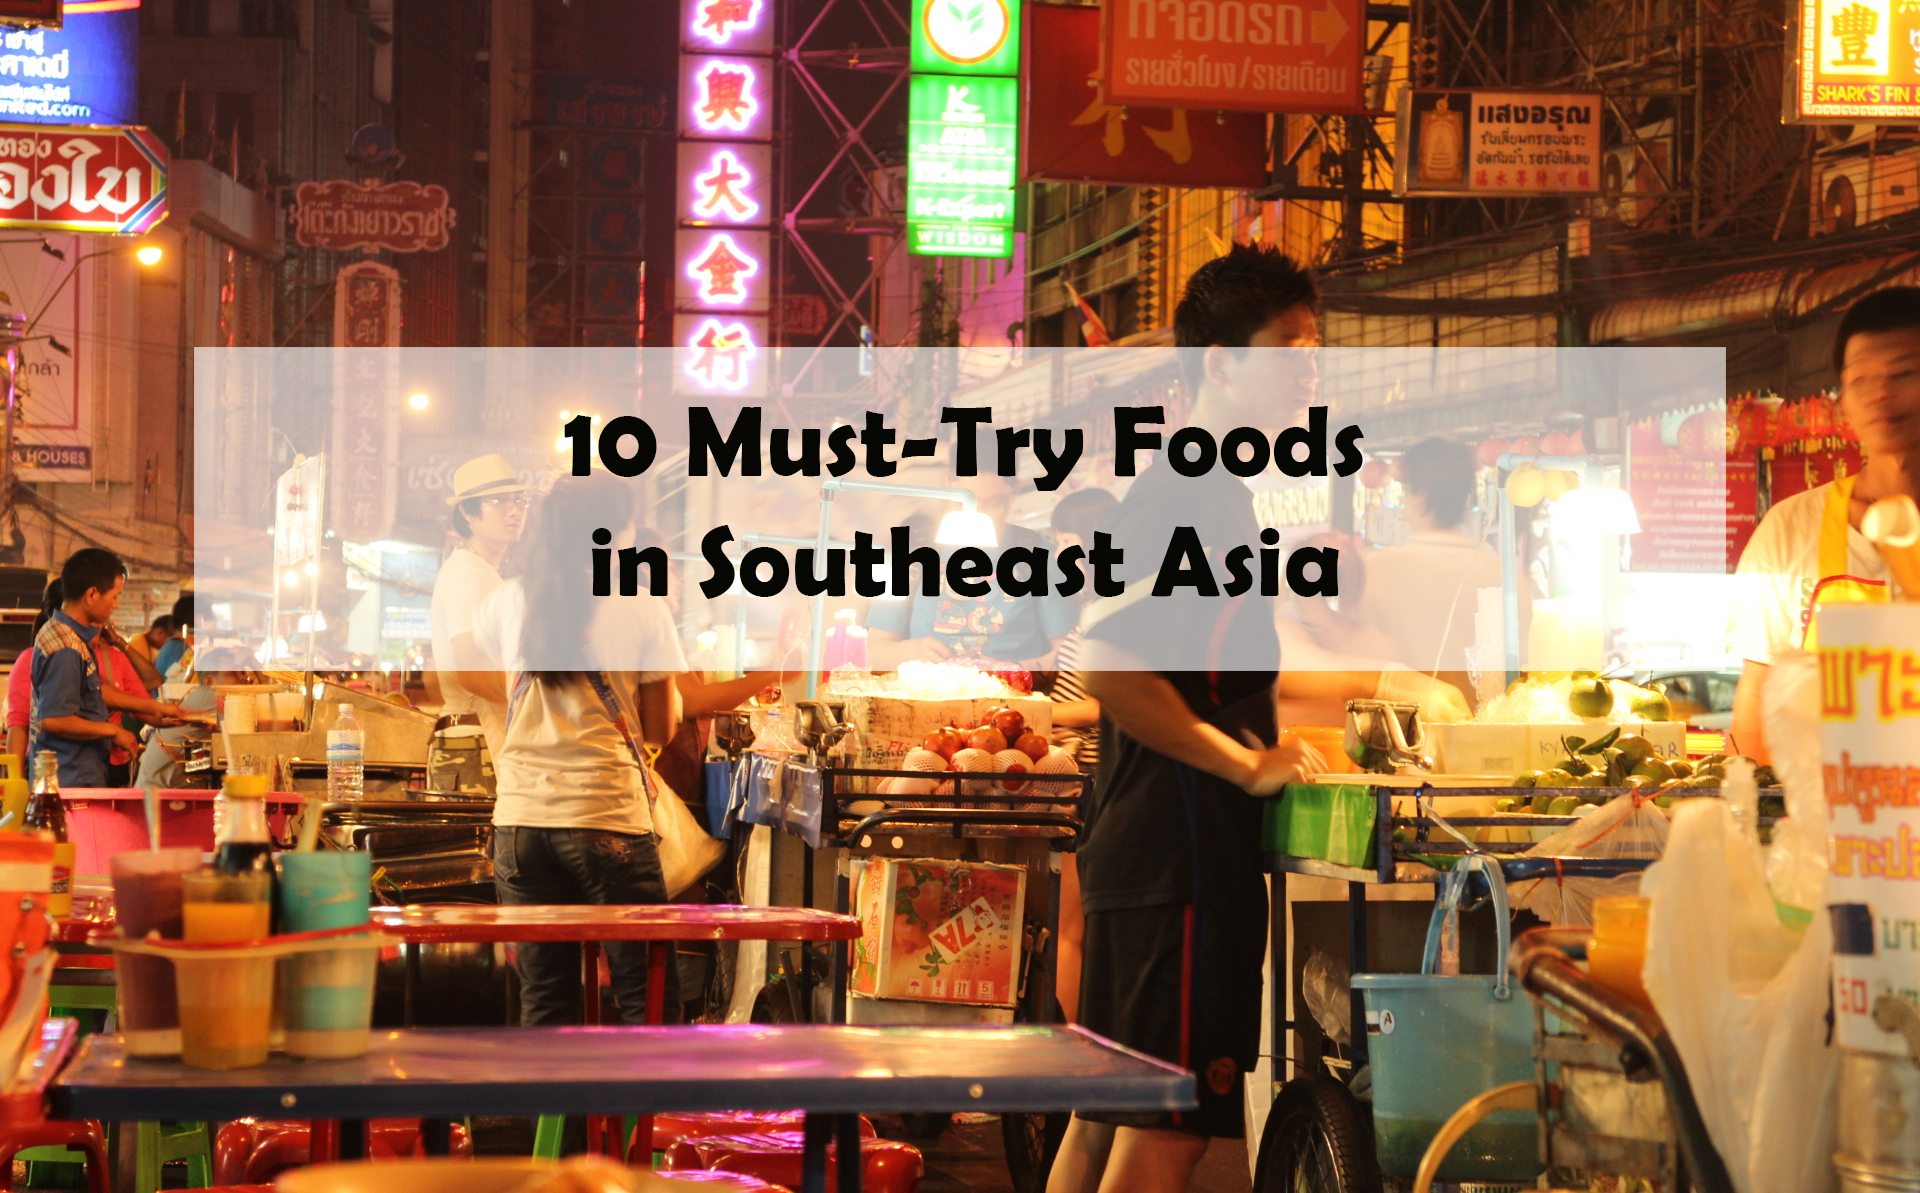 10 Must-Try Foods in Southeast Asia